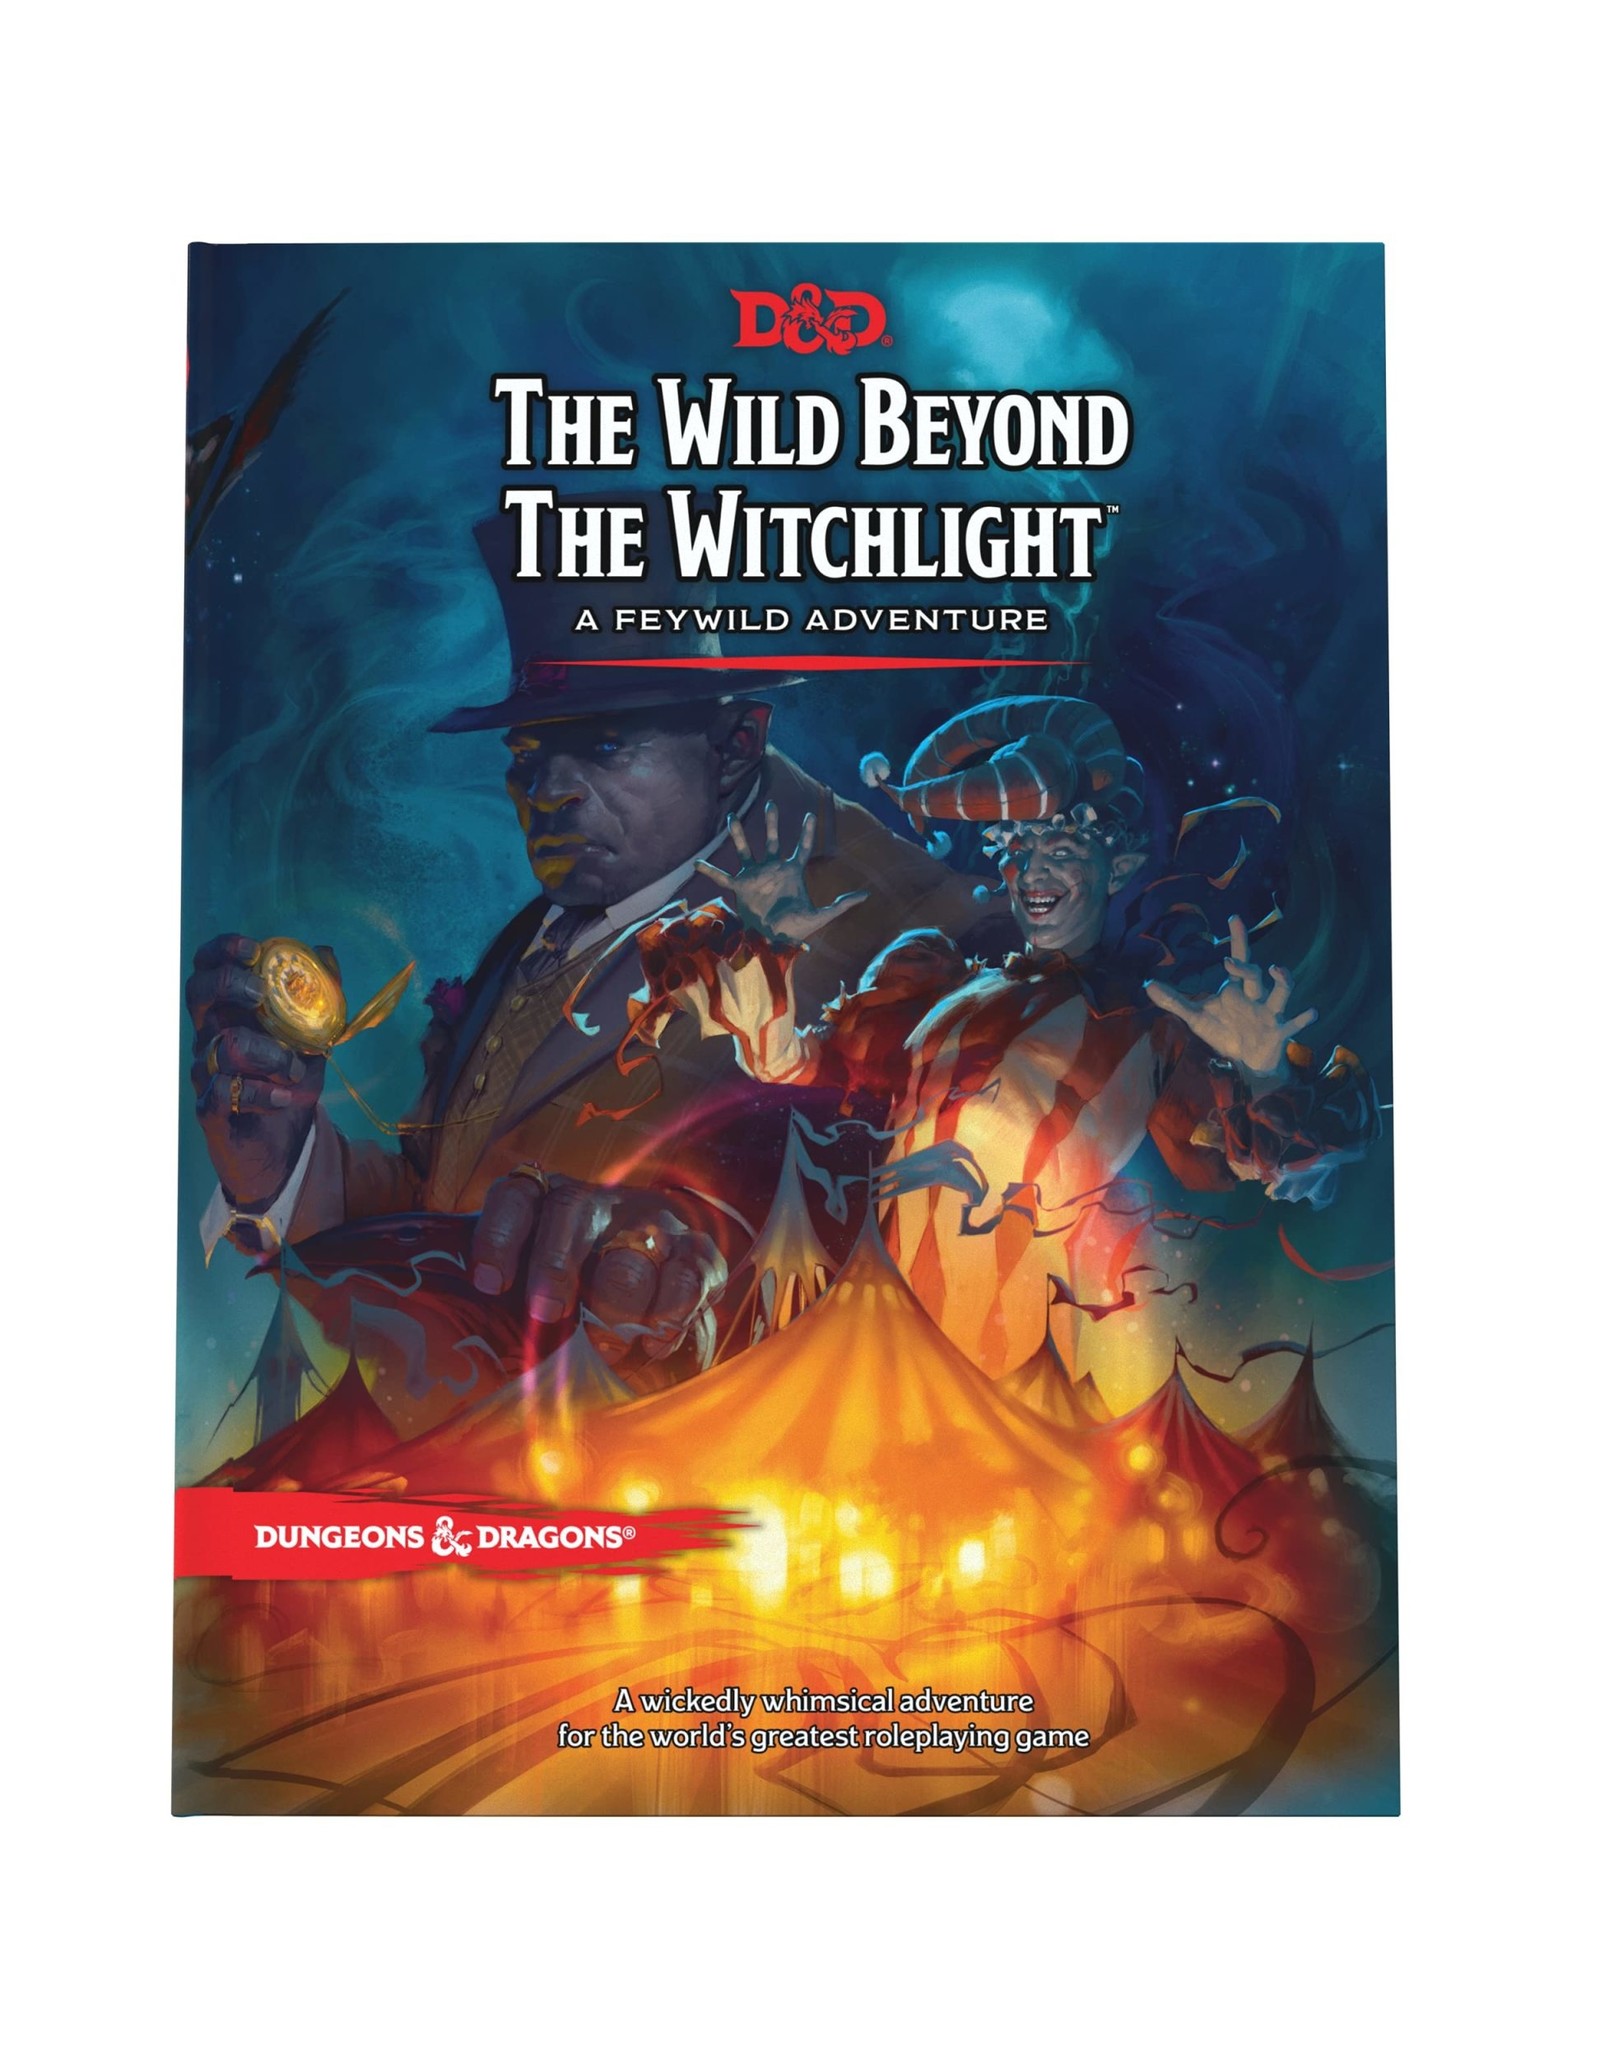 Dungeons & Dragons D&D - The wild beyond the witchlight